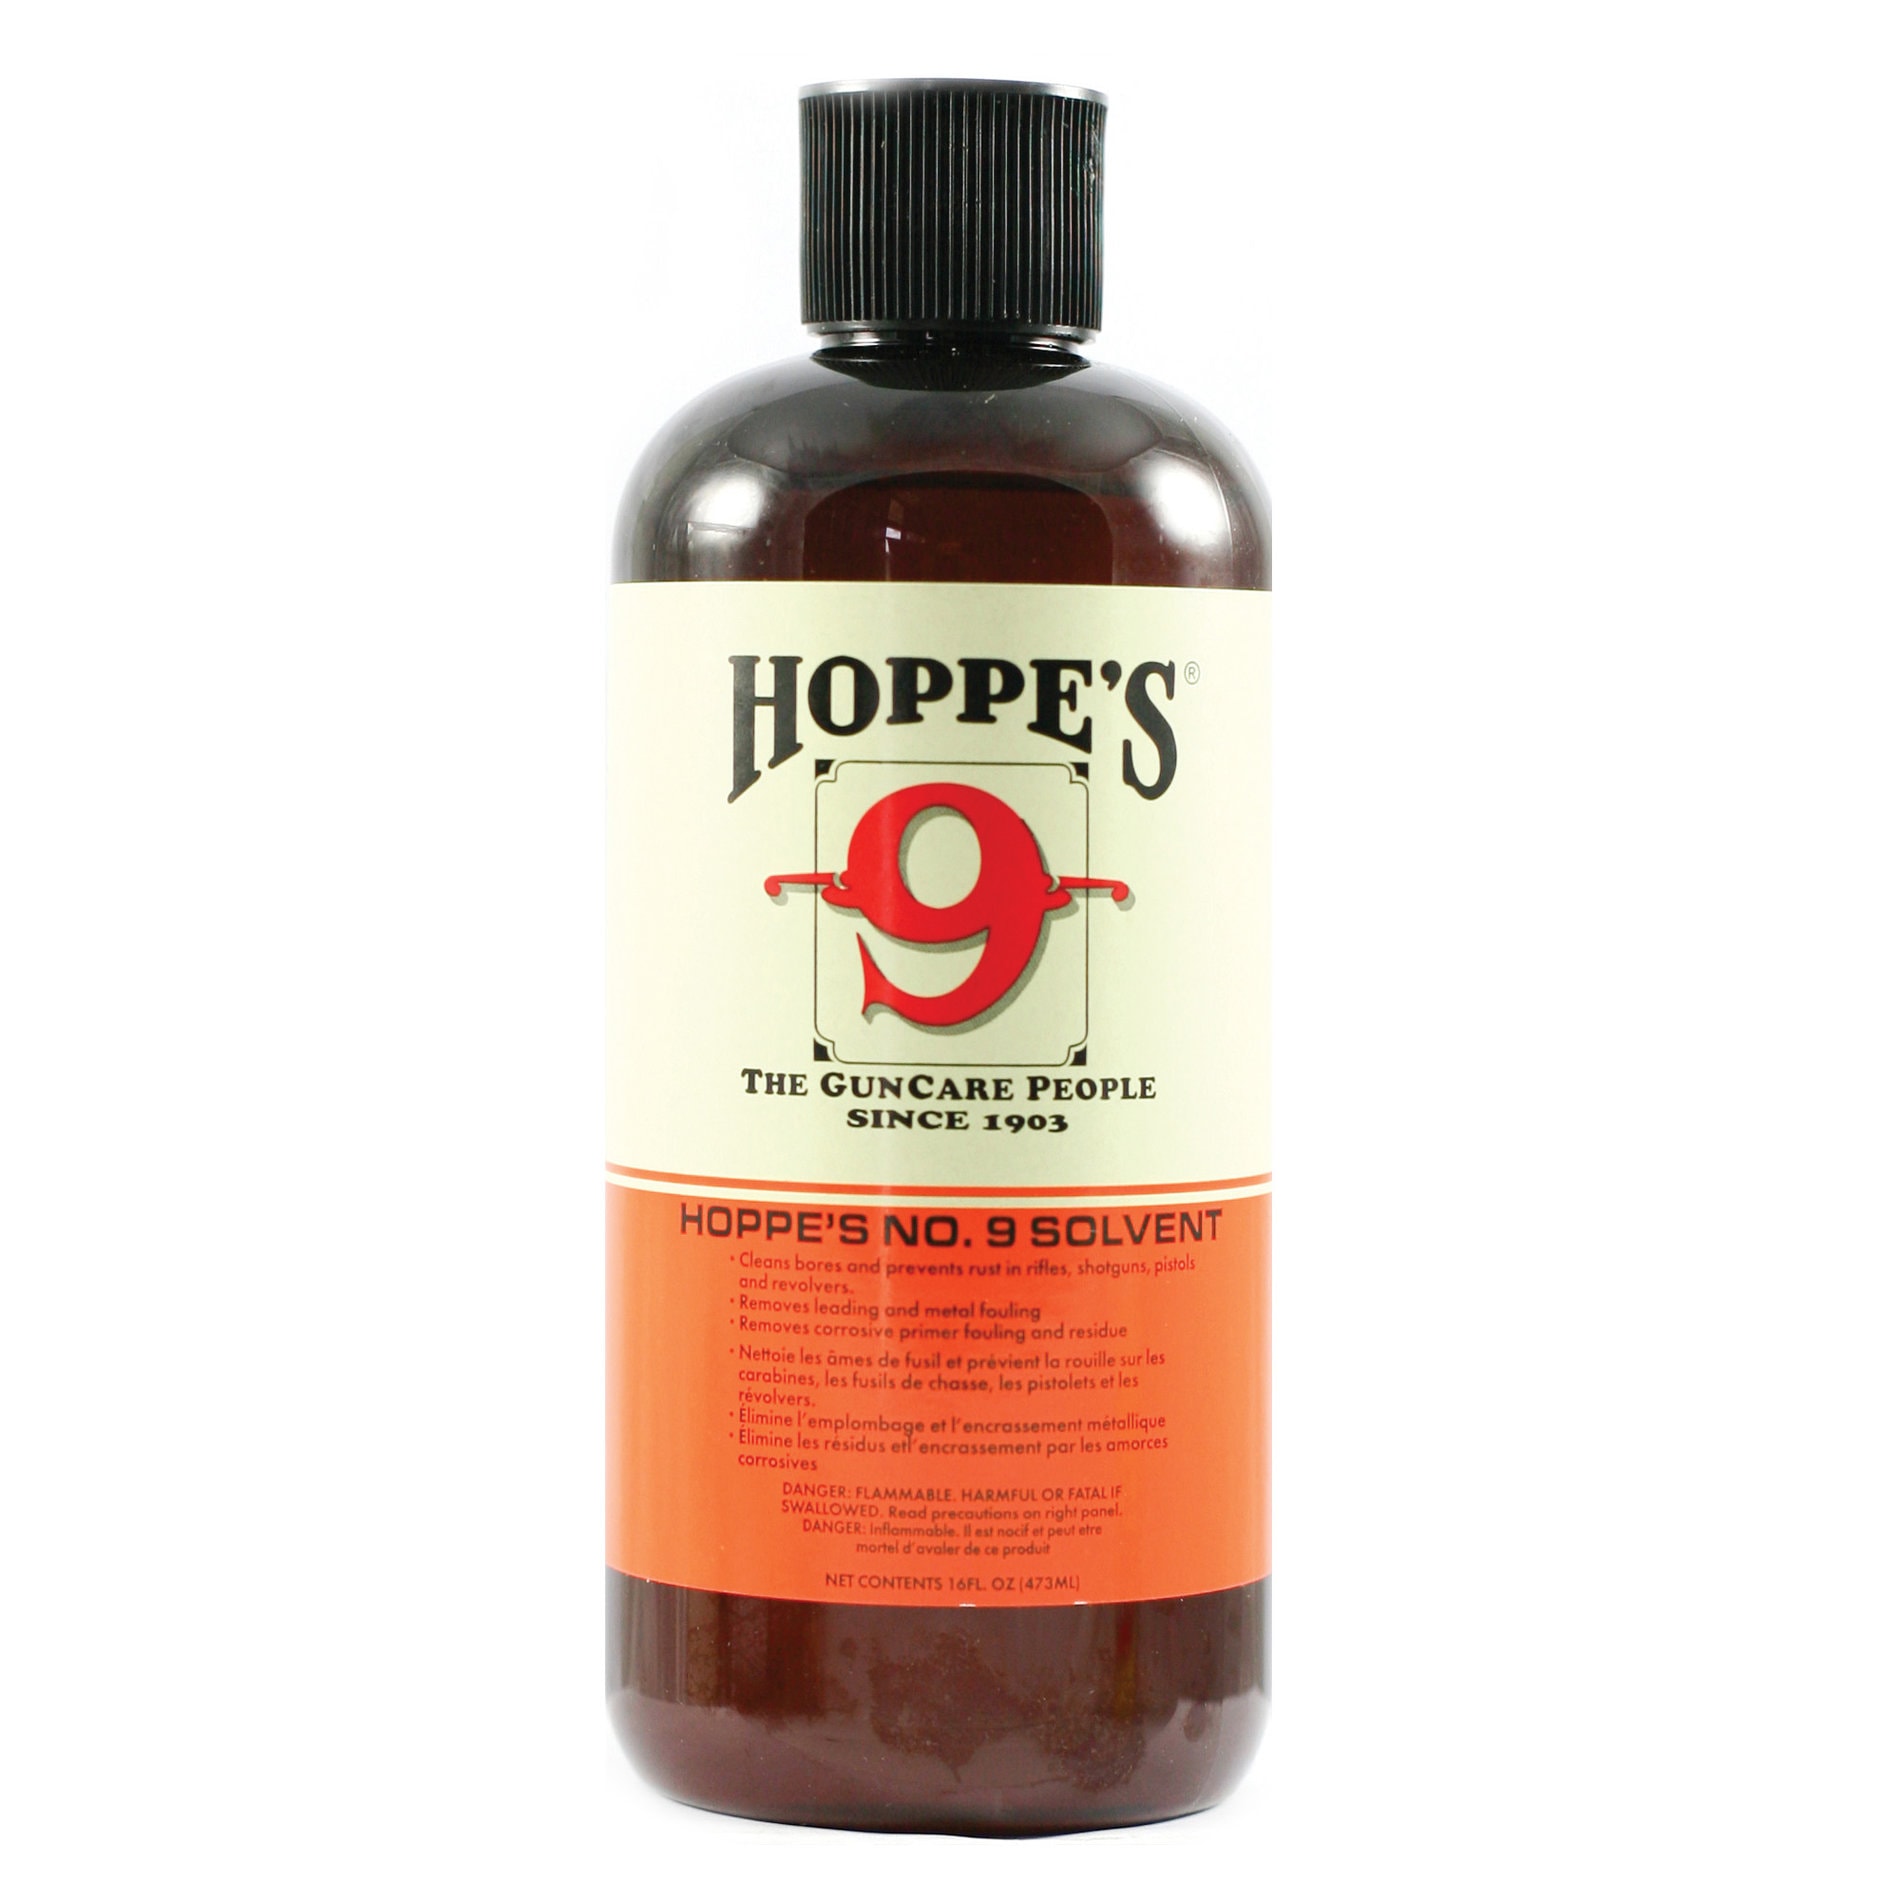 Hoppe's No. 9 Gun Cleaning Solvent